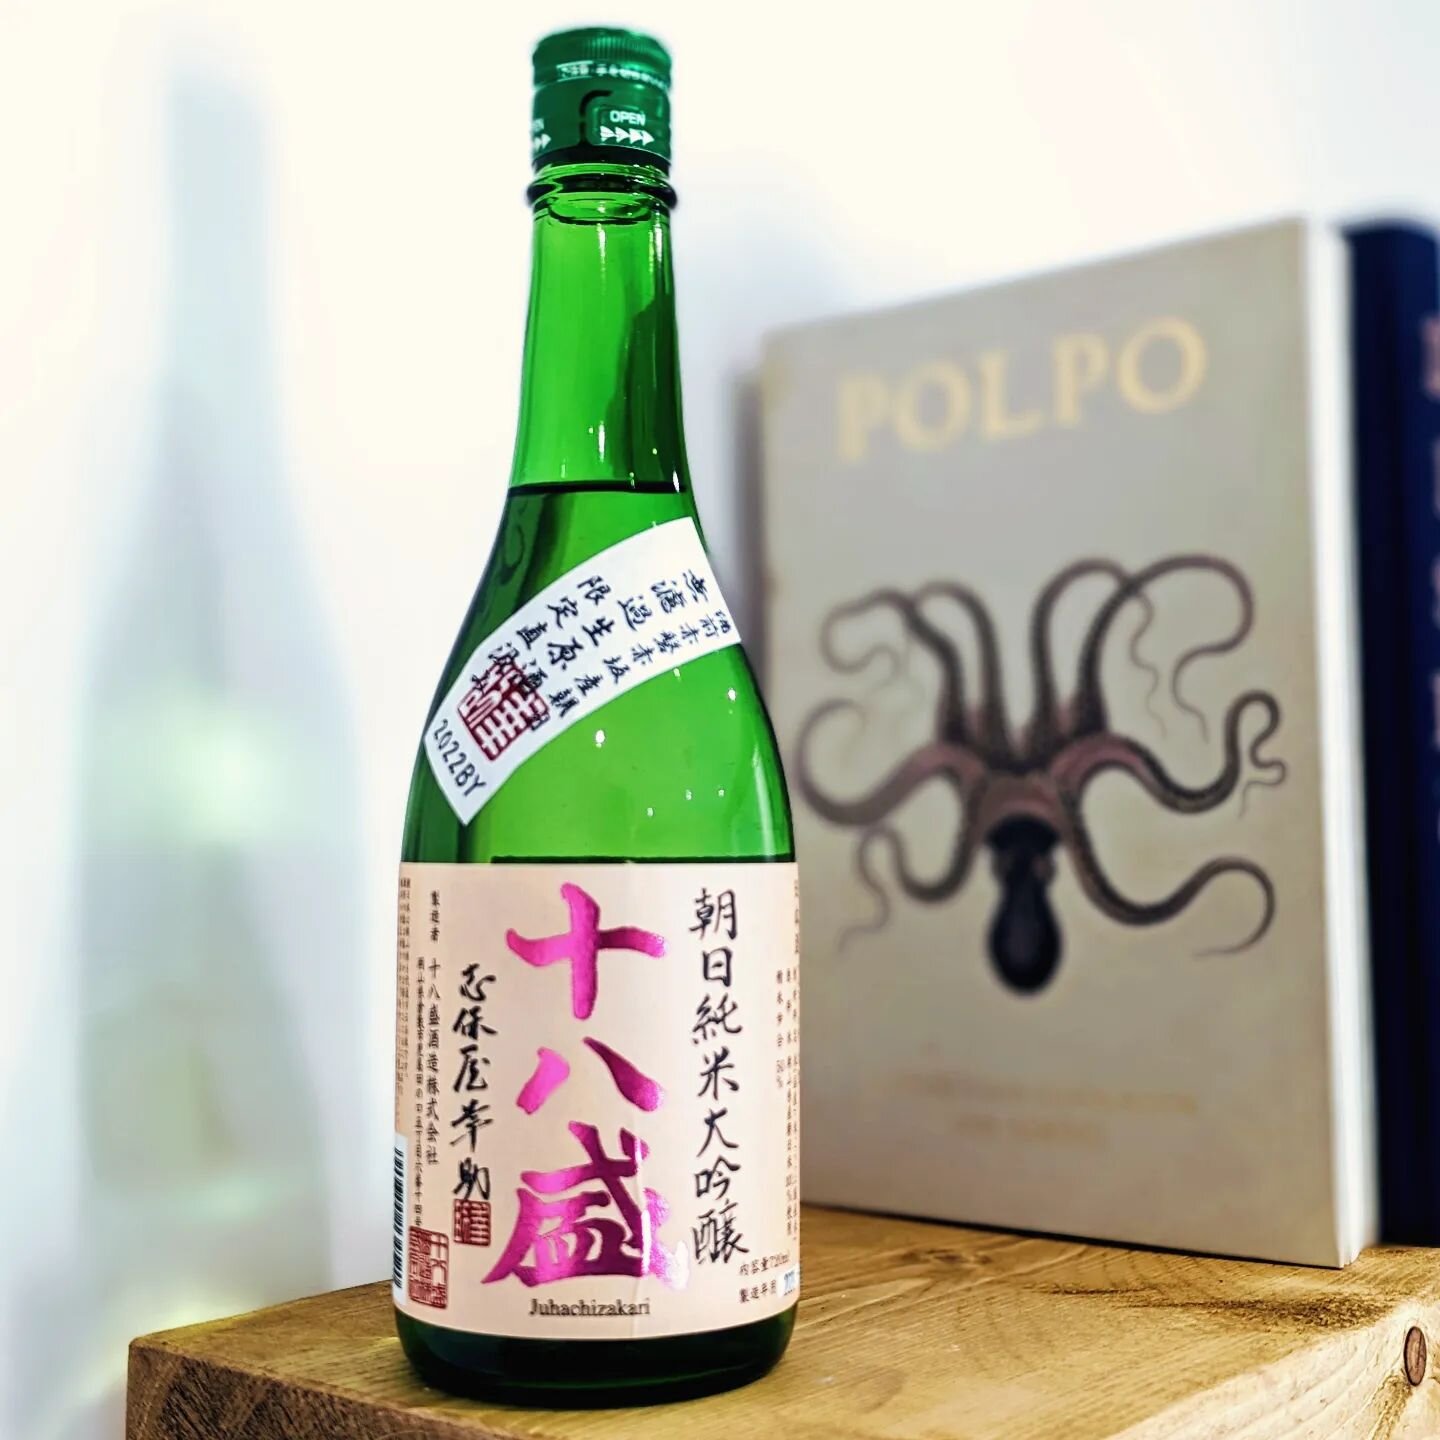 STOP... Nama Time.🍶
.
Juhachi Zakari 'Directly Drawn' Junmai Daiginjo Nama Genshu 
.
In a nutshell: Fresh vibrant fruity
.
Why we love it: The brewery's meticulous use of water from the local Takahashi River, paired with Asahira rice (full of the fl